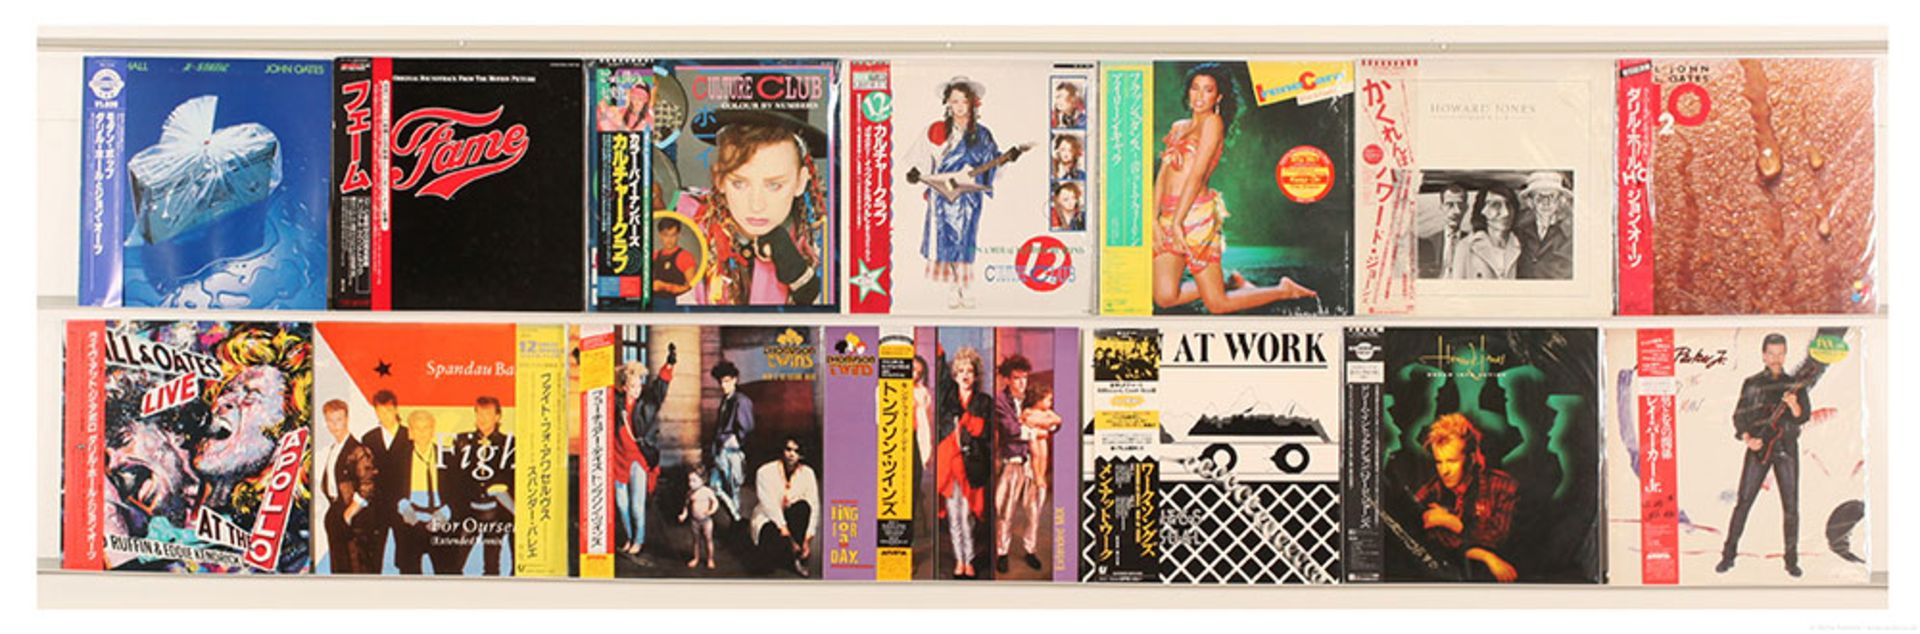 GRP inc Japanese issue pop LPs artists such as